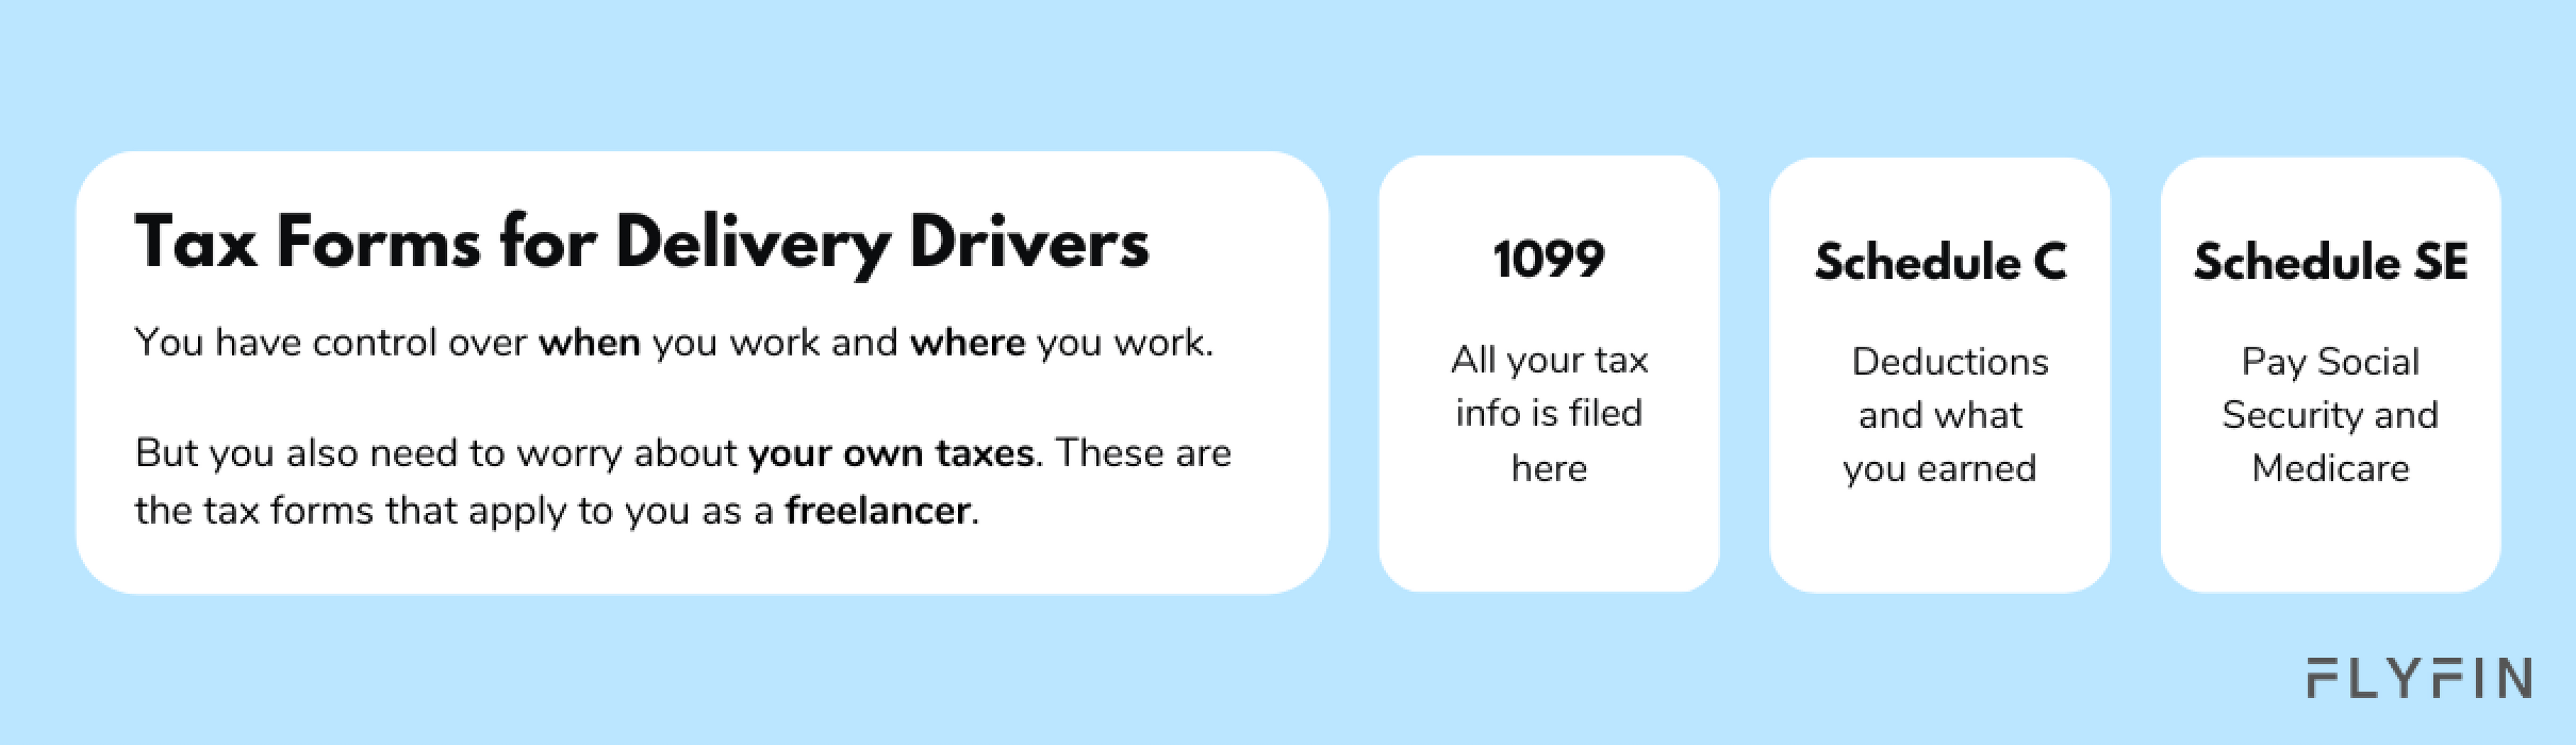 How do delivery drivers claim tax deductions?